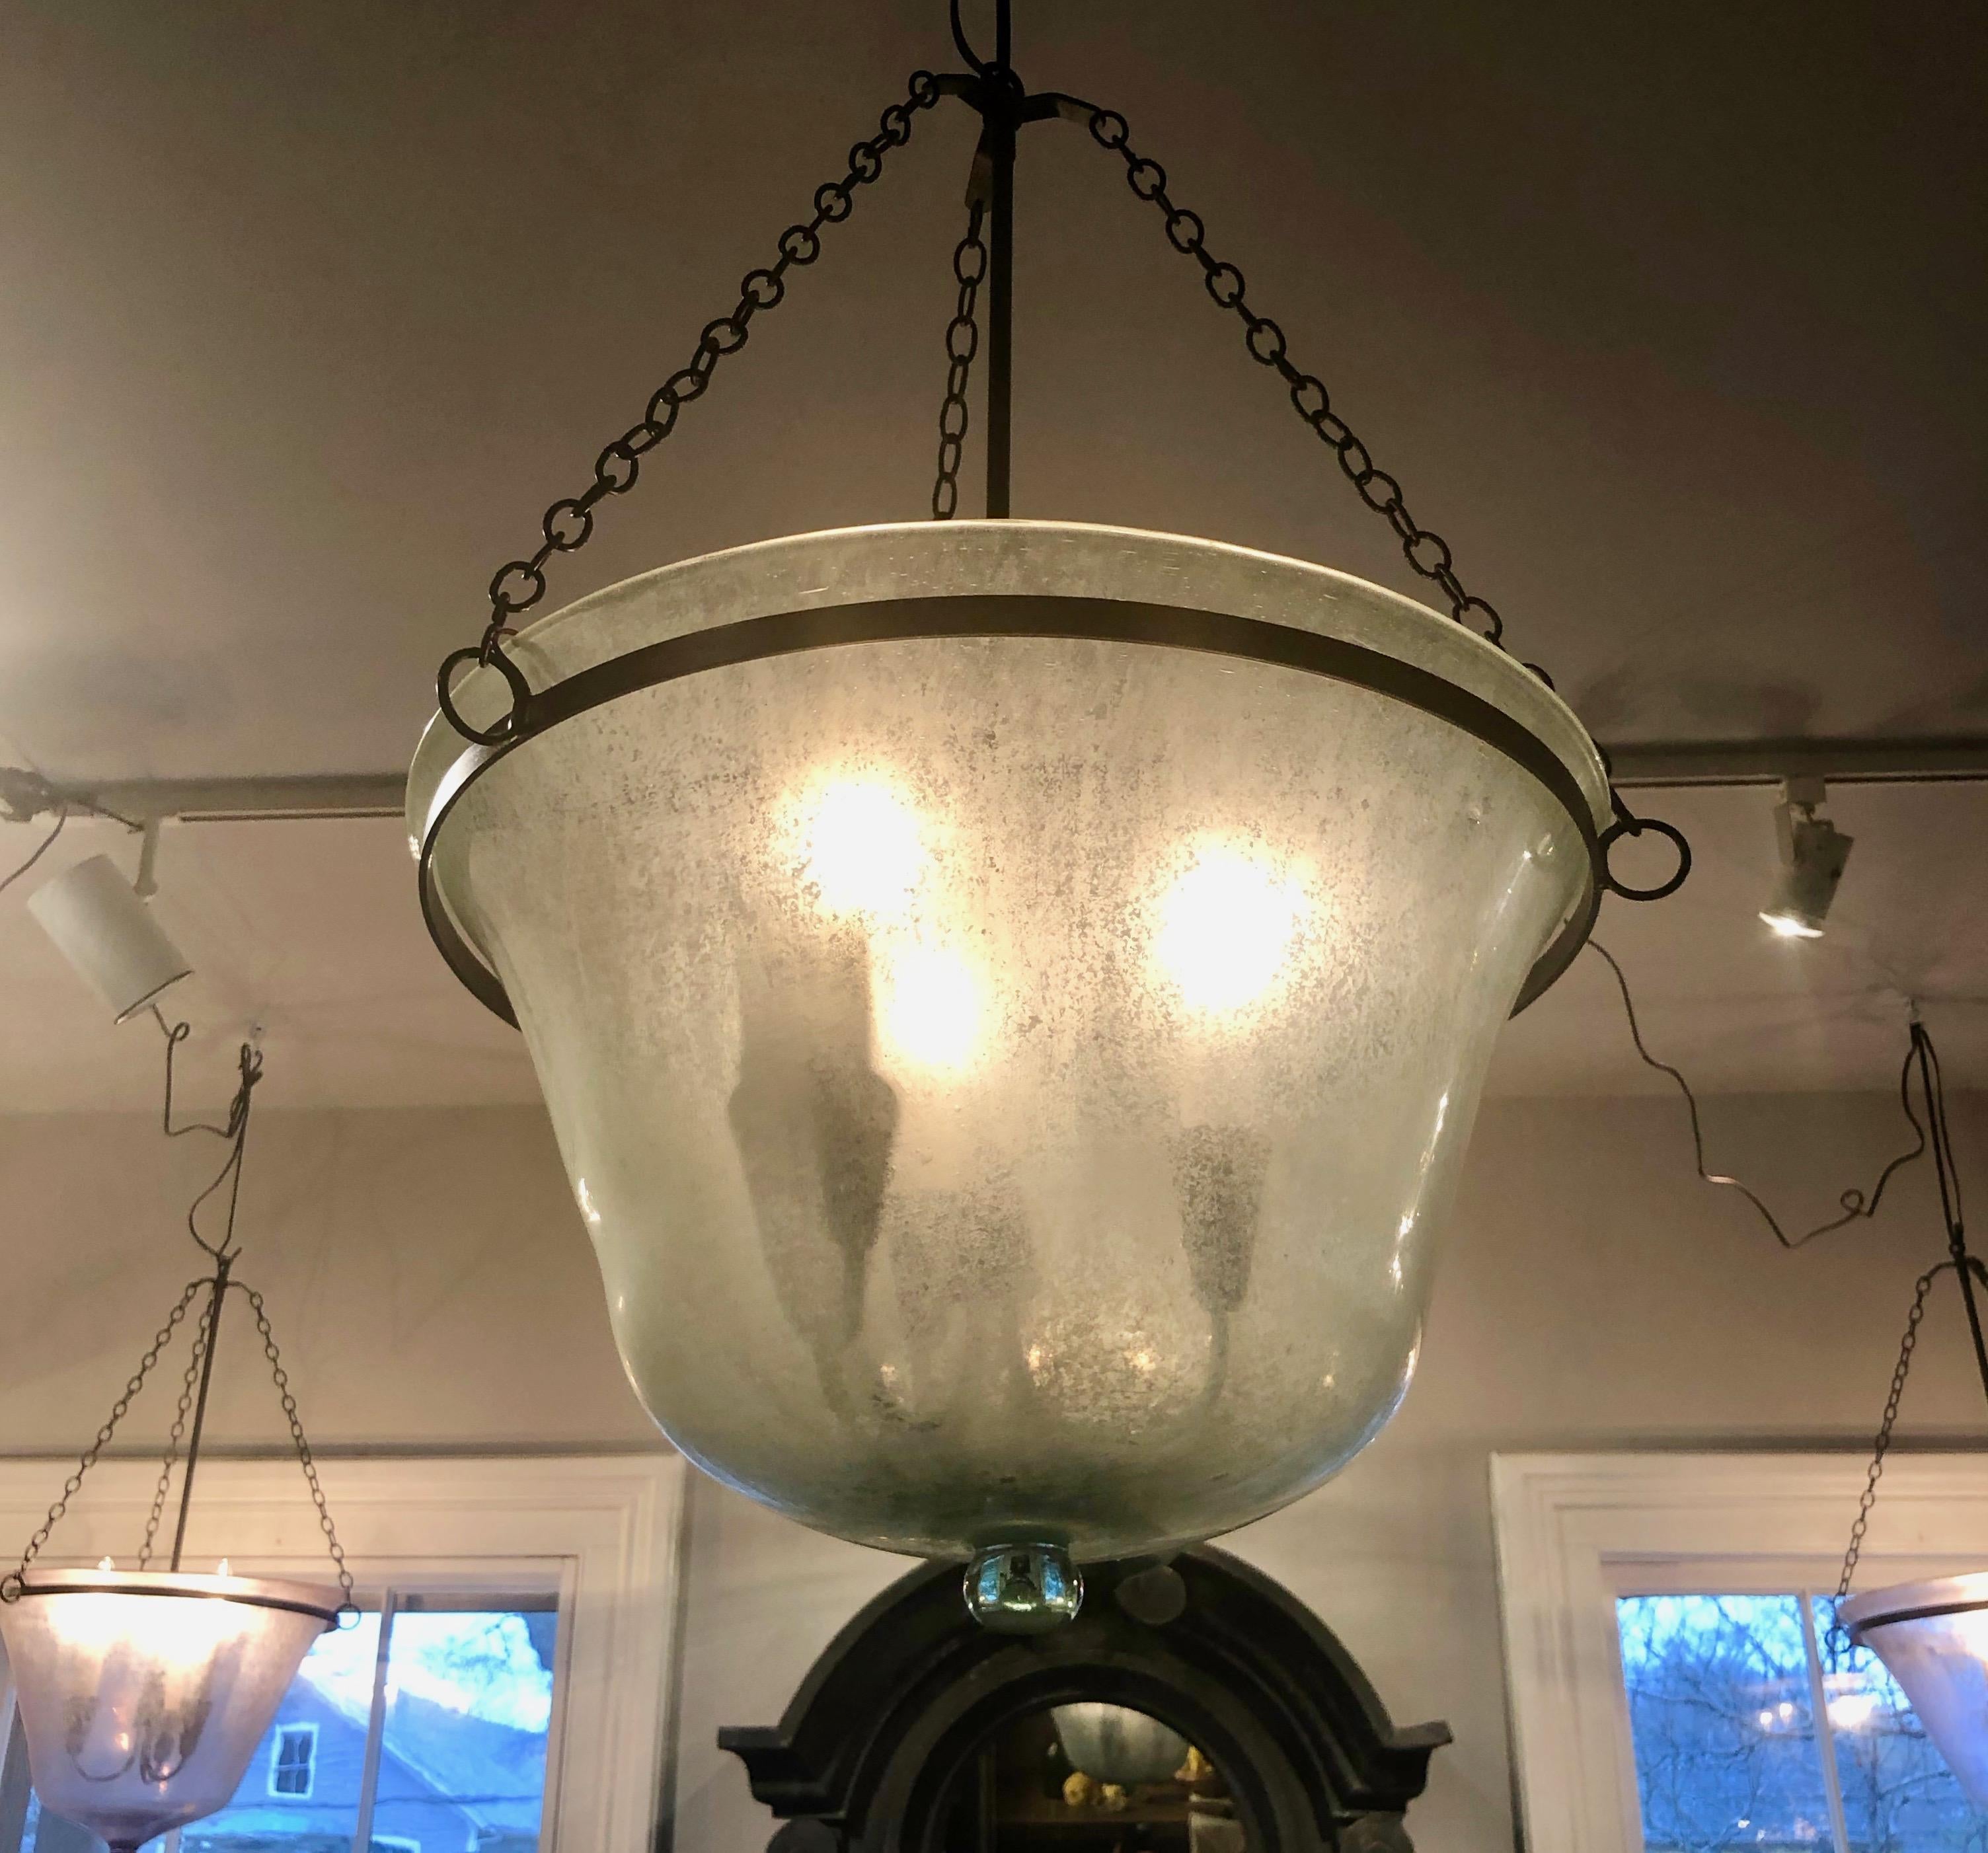 We have always had a thing for hand blown French garden cloches that come in two configurations, bell form and melon form. This one is a melon cloche (a little shorter and wider than a bell cloche) and it has been converted into a hanging light with